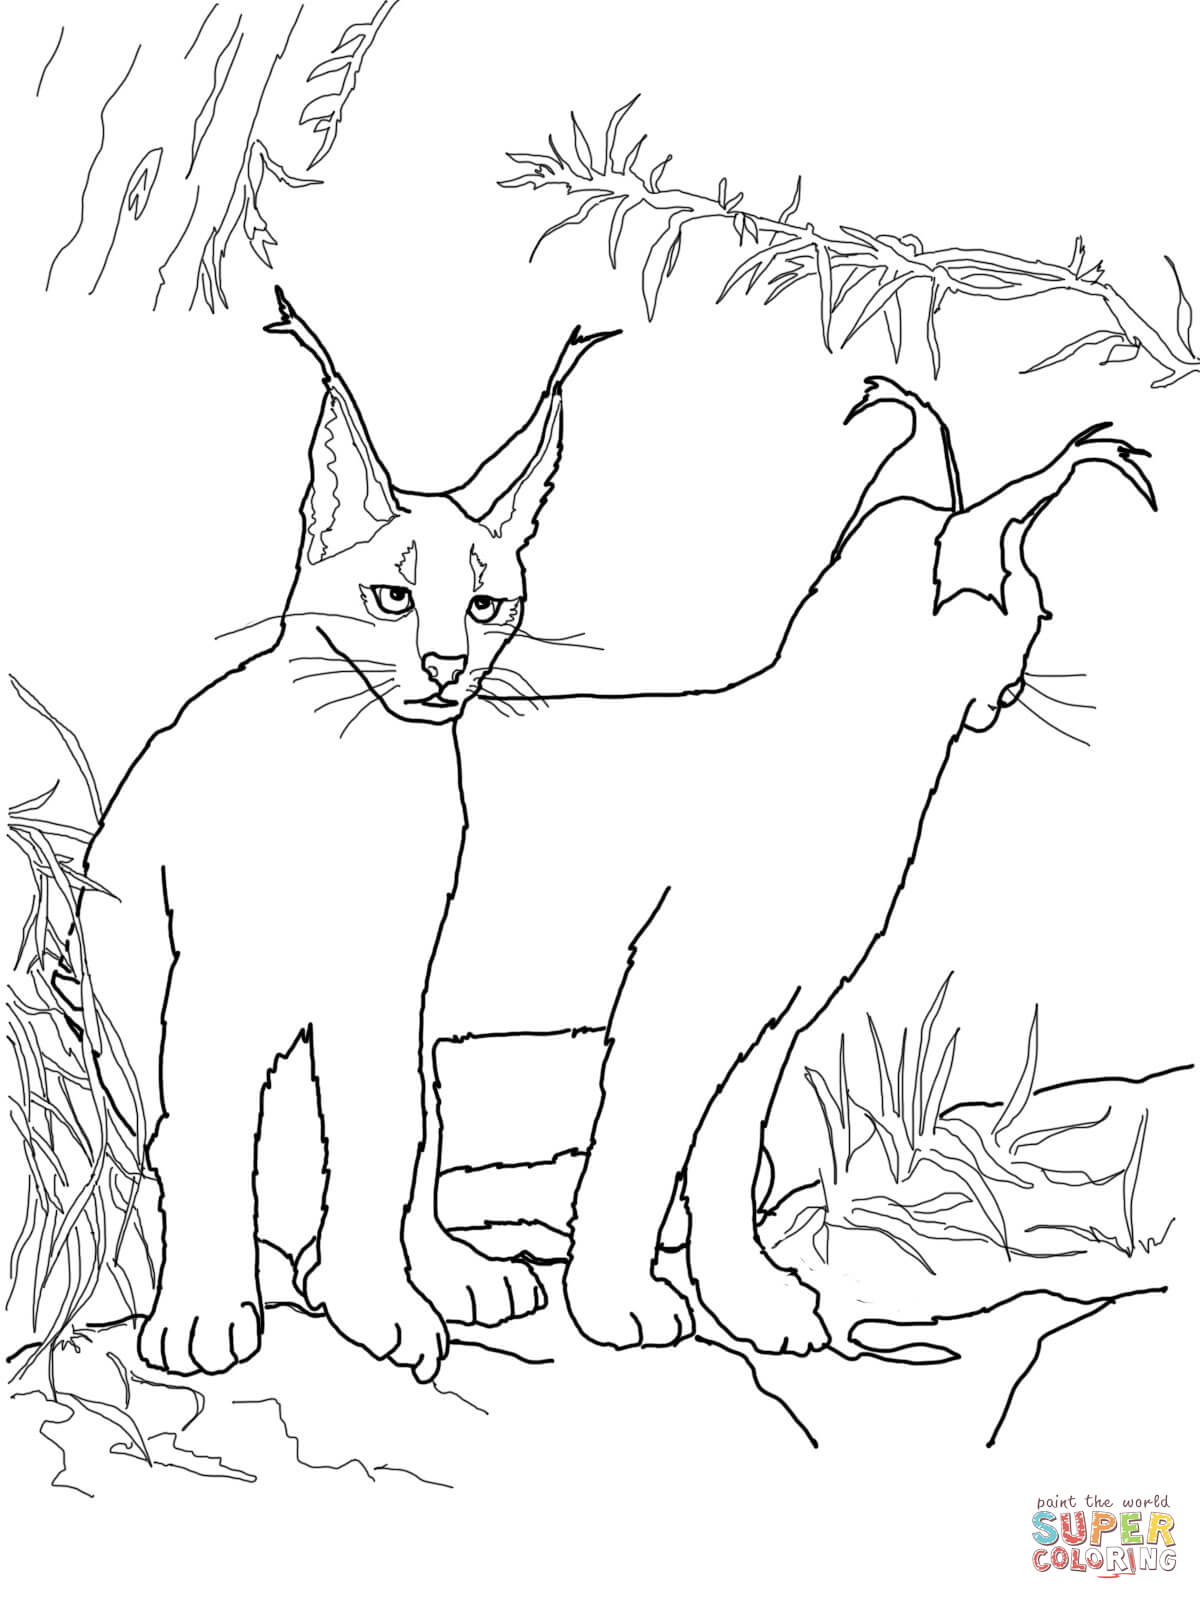 Caracal Kittens coloring page | Free Printable Coloring Pages